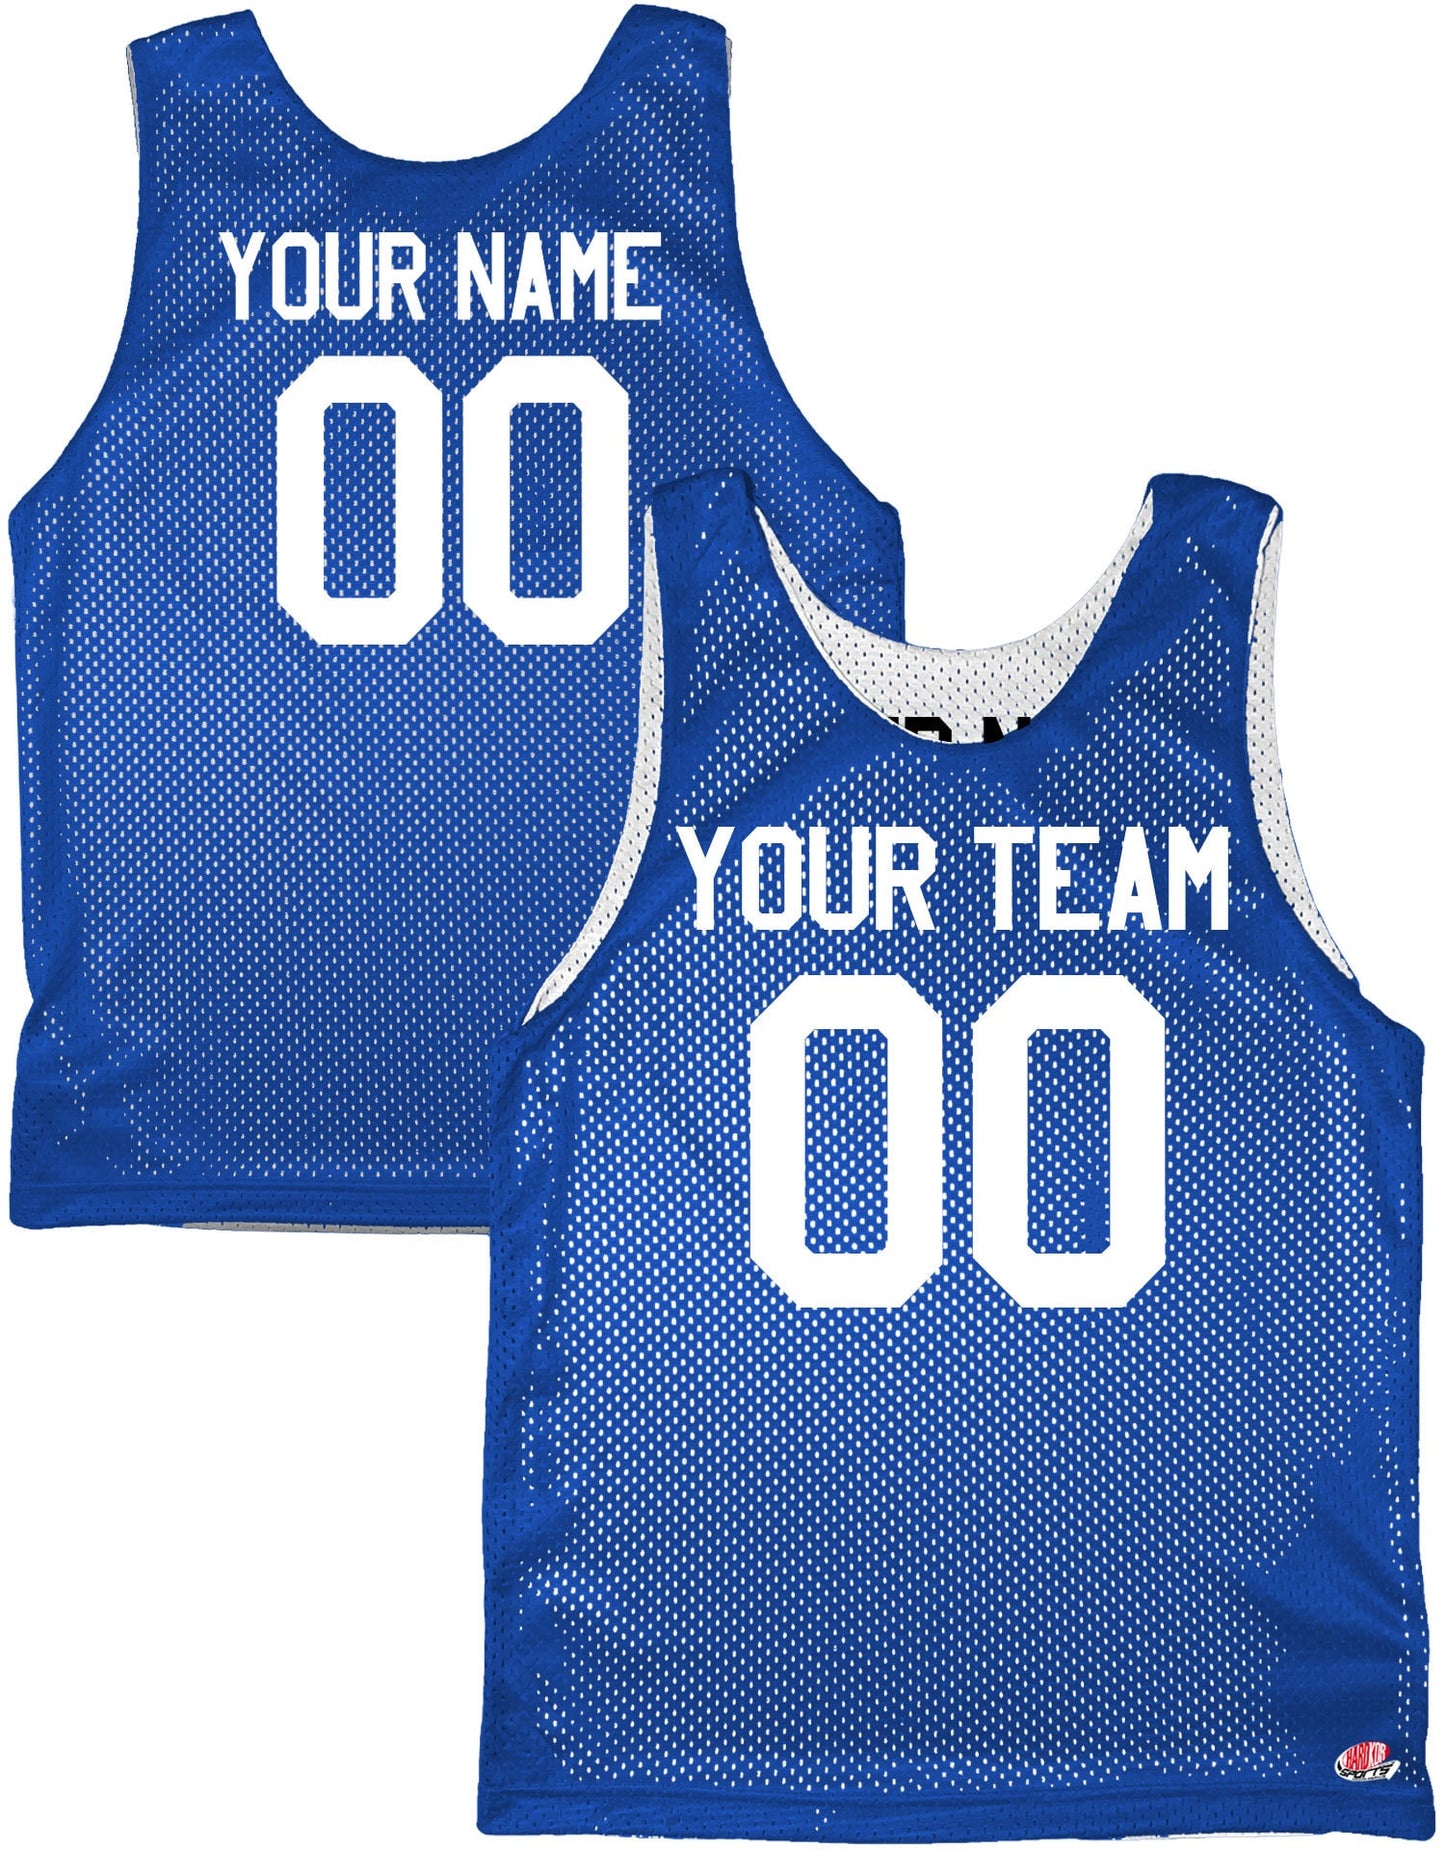 Royal Blue, Navy Blue, Light Blue, White, Gold | Custom Reversible Basketball Jersey | Tricot Mesh.  Team, Player Name & Numbers Reverse